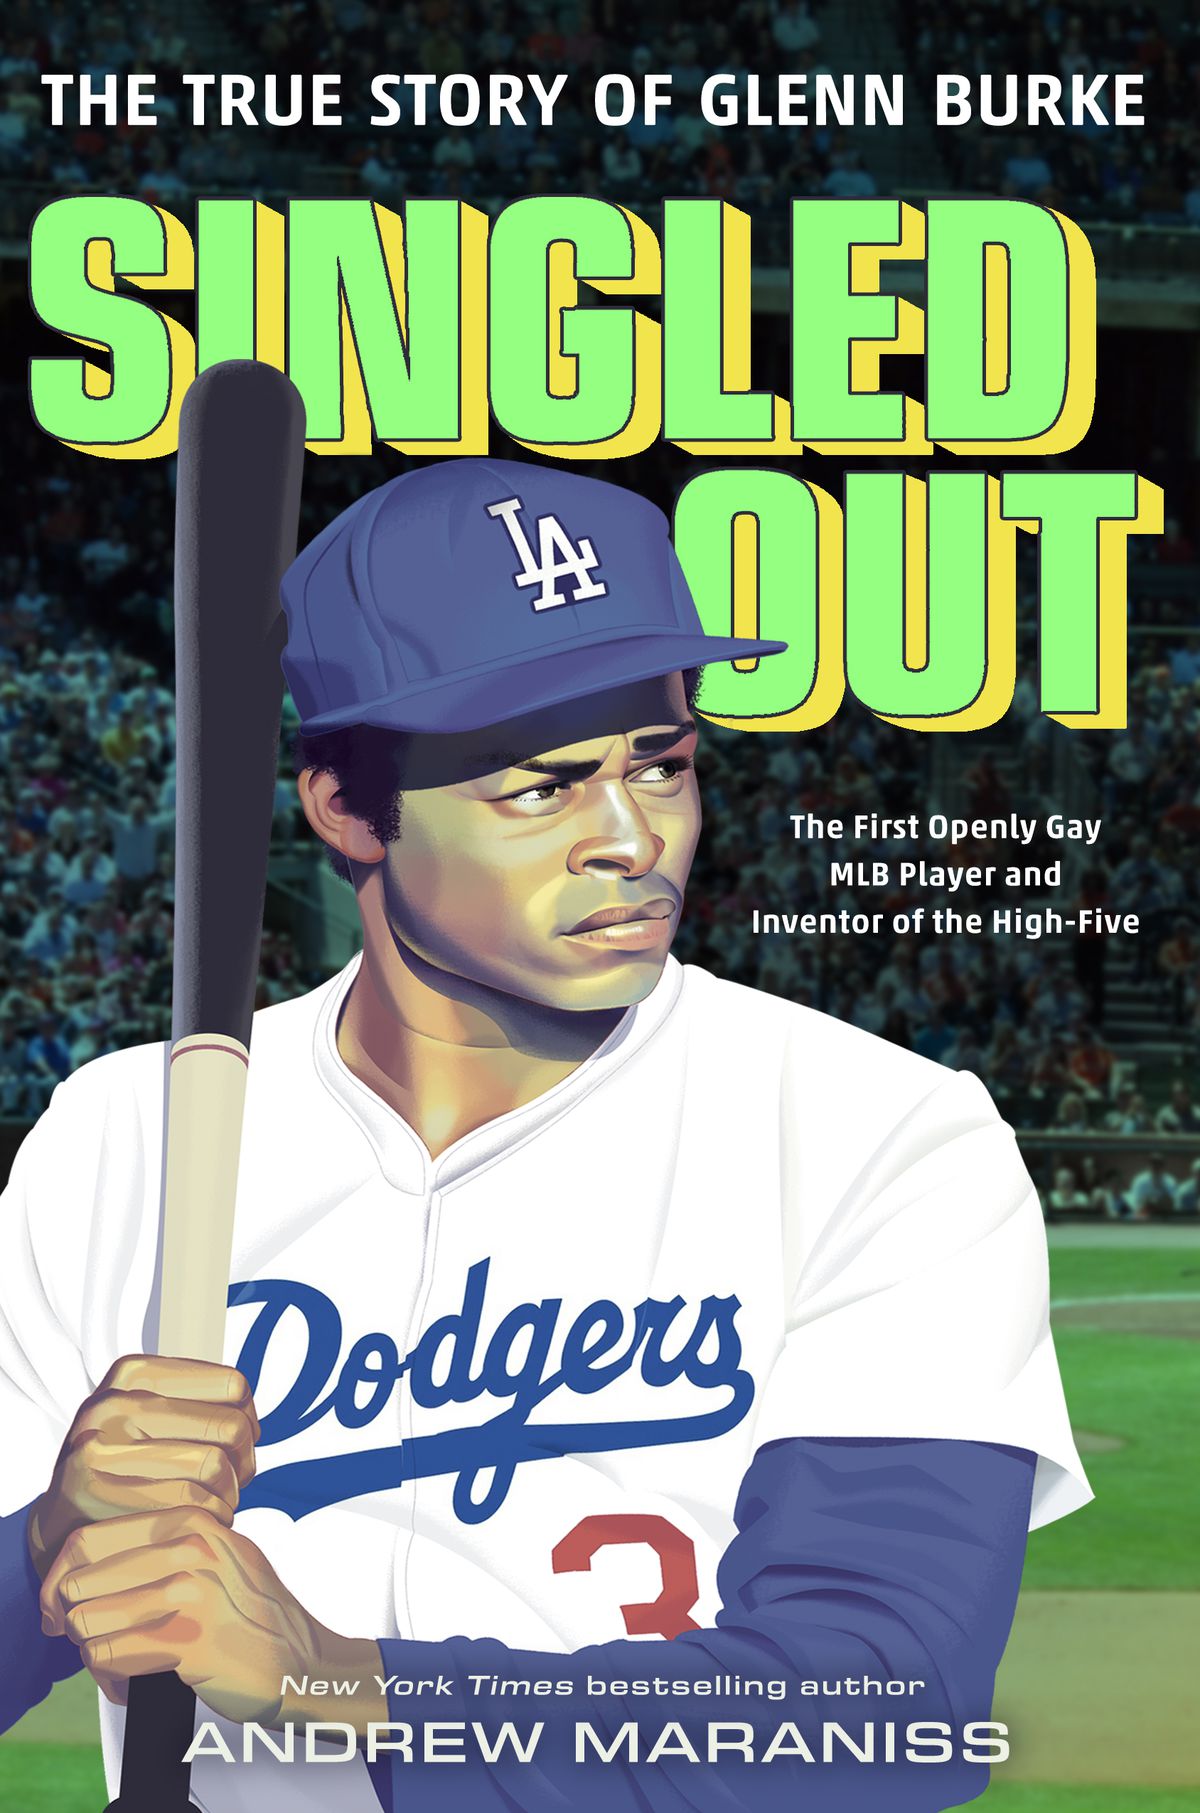 Glenn Burke wears a Dodgers uniform at bat on the cover of this new biography.